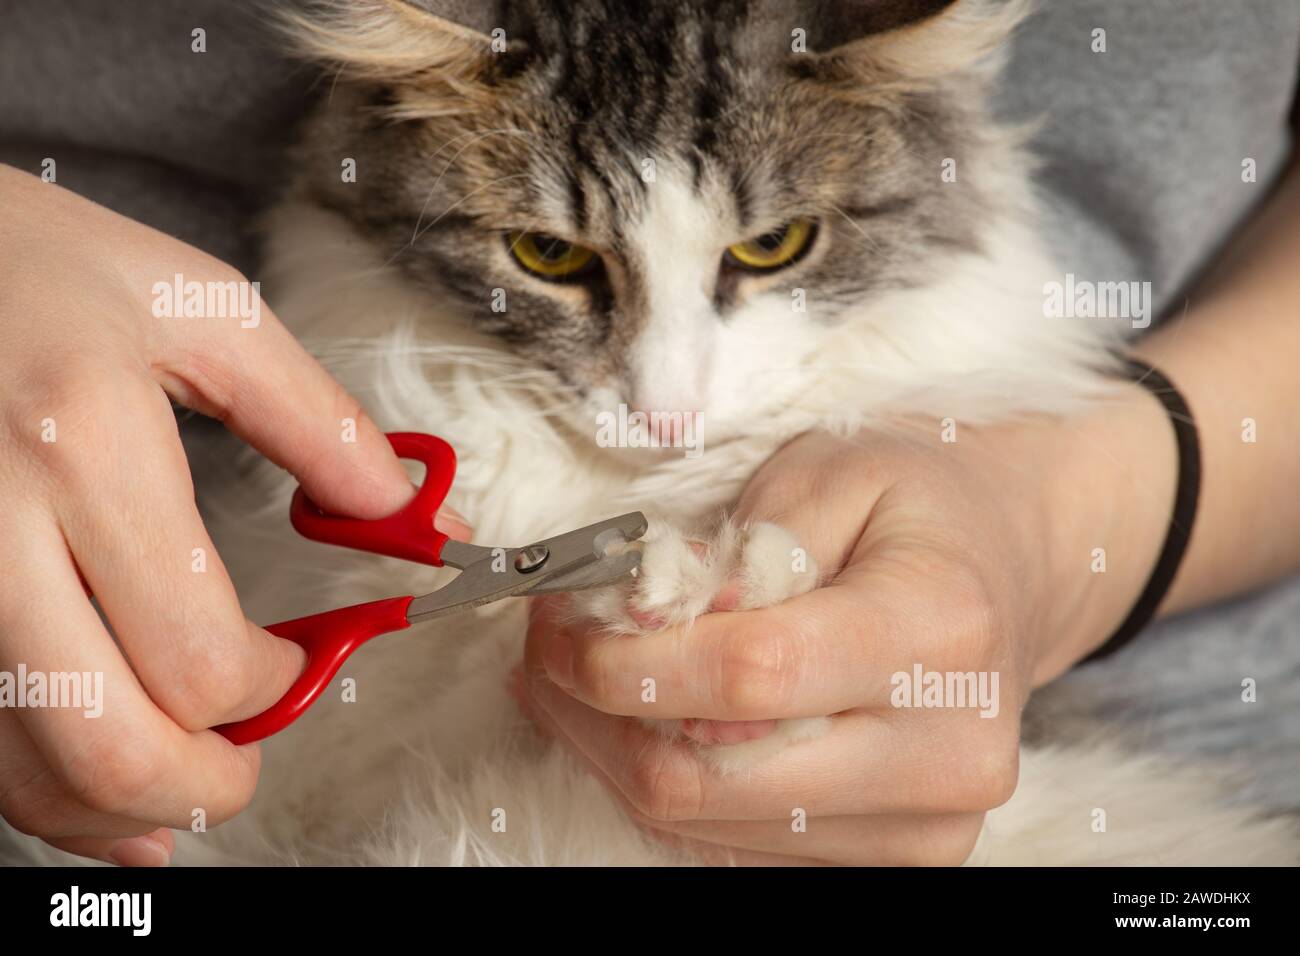 How To Cut & Trim Your Cat's Nails | Petbarn